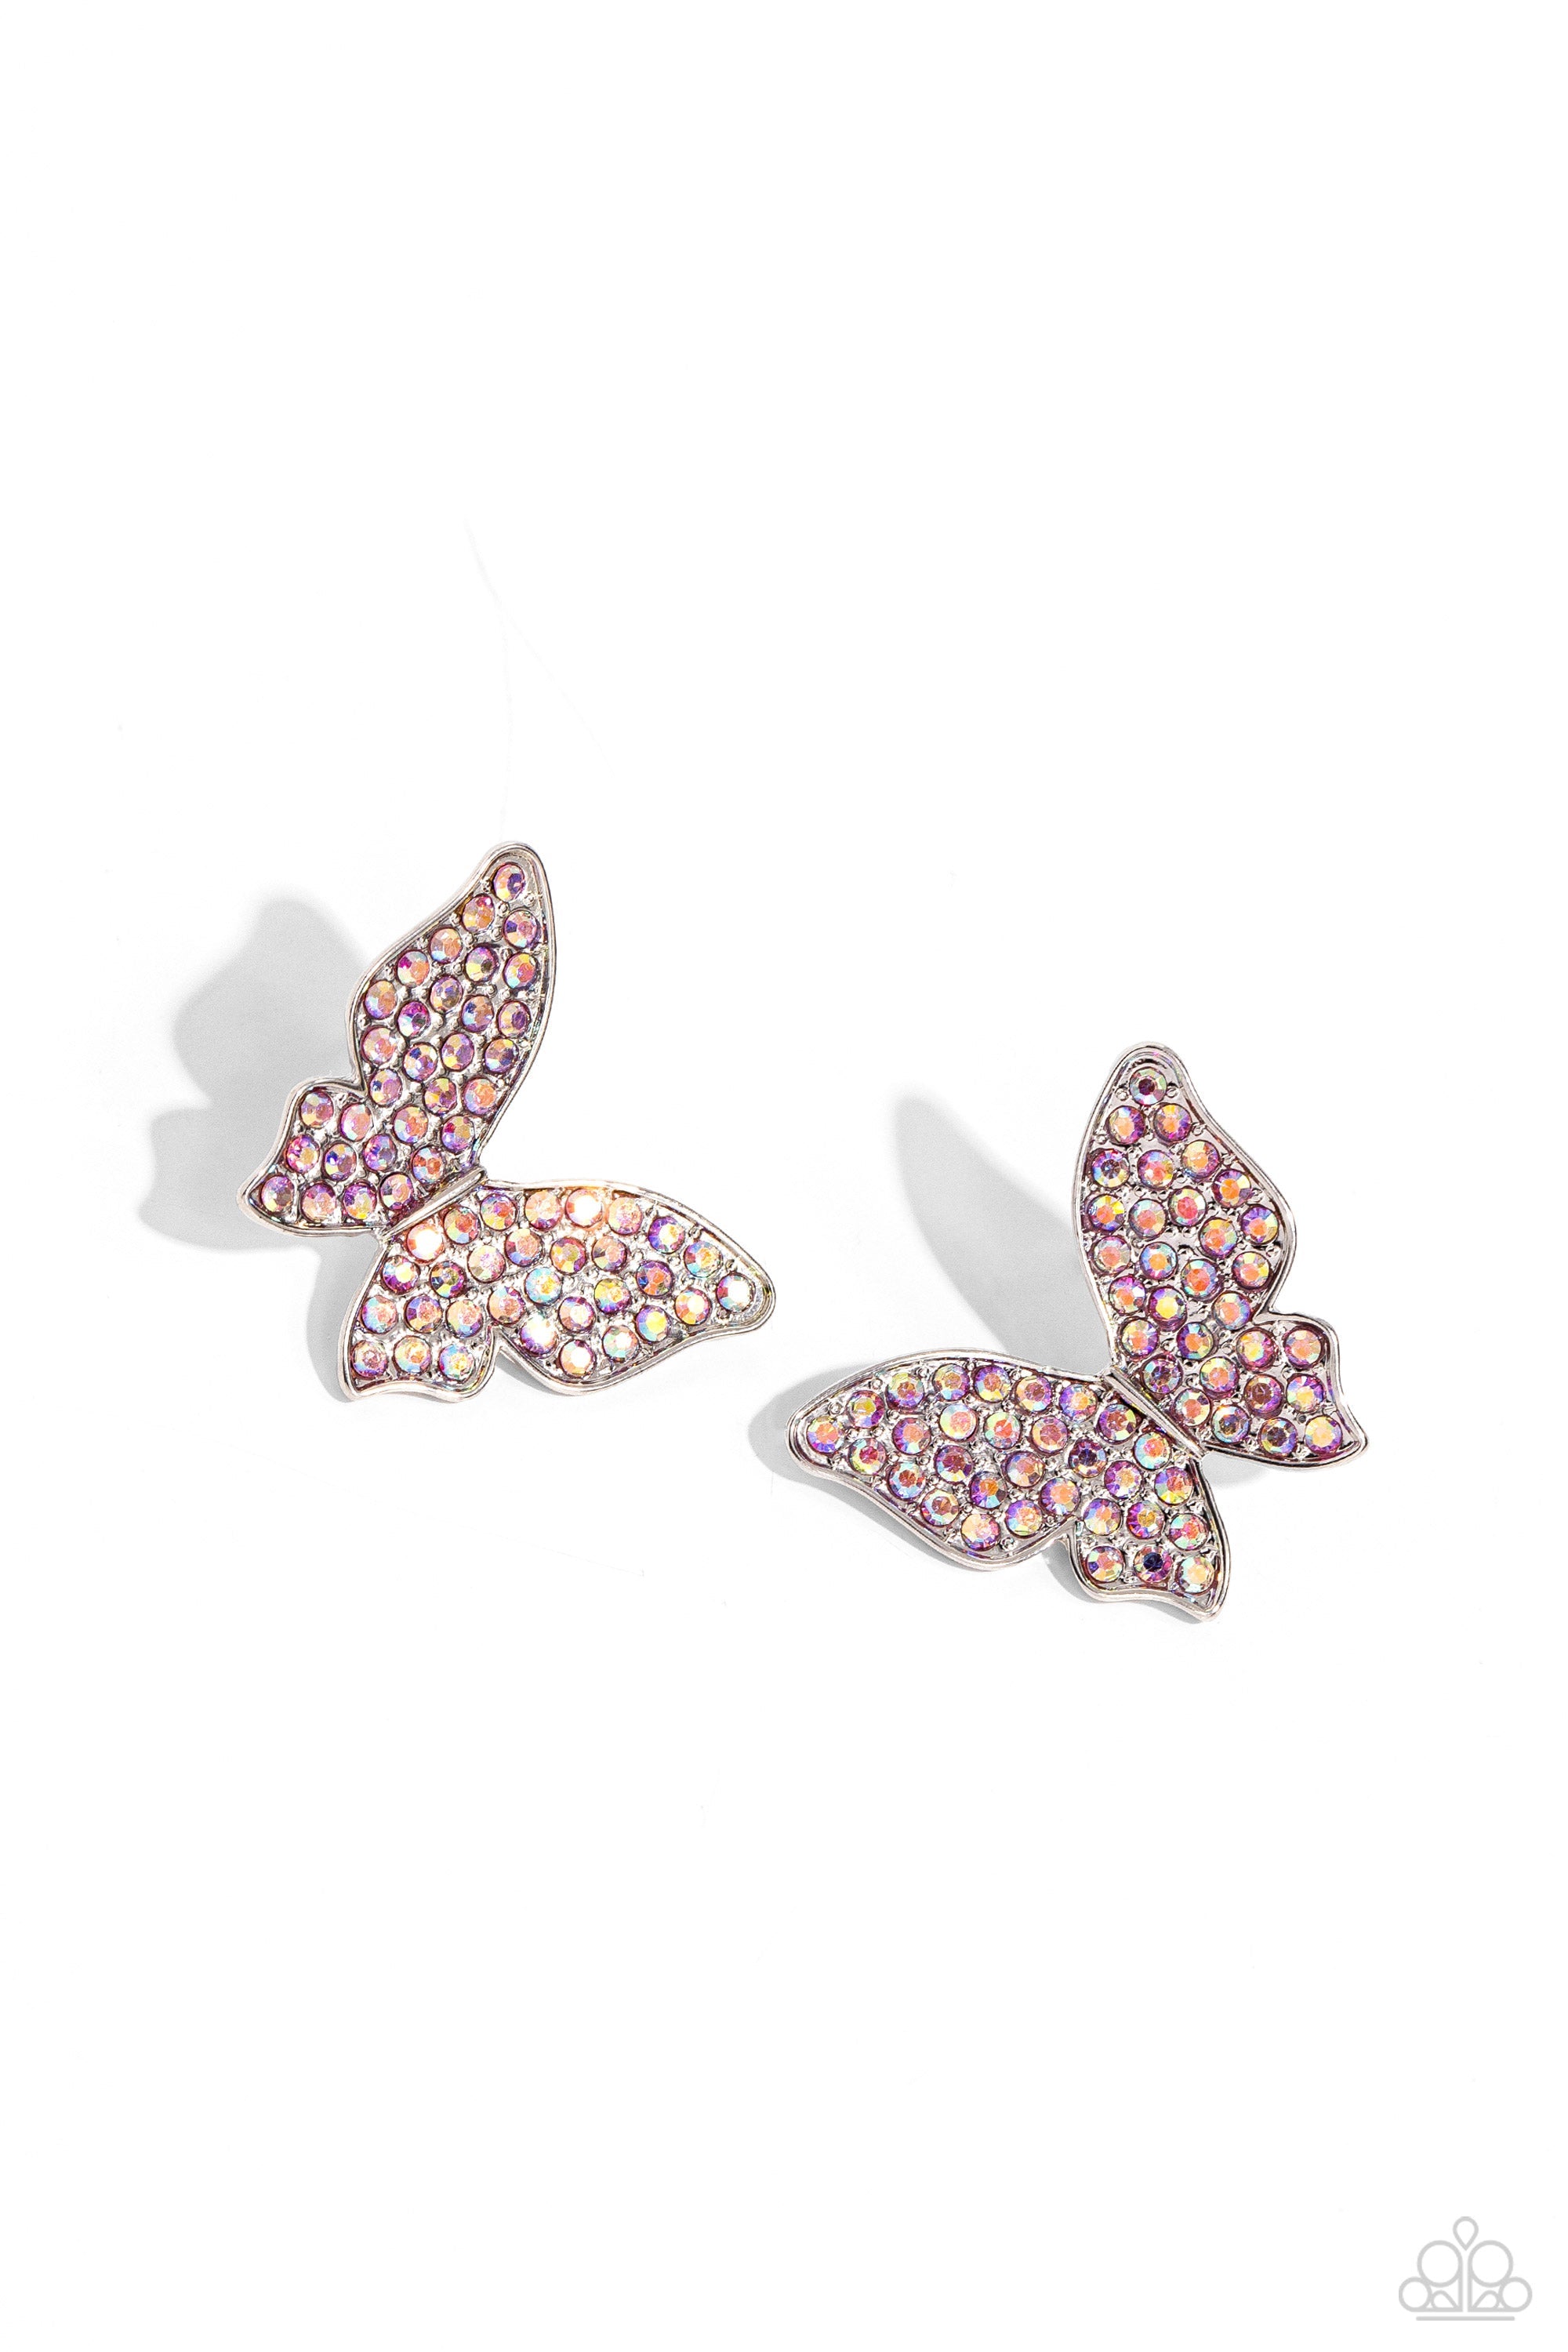 High Life Pink Iridescent Rhinestone Butterfly Earrings - Paparazzi Accessories- lightbox - CarasShop.com - $5 Jewelry by Cara Jewels